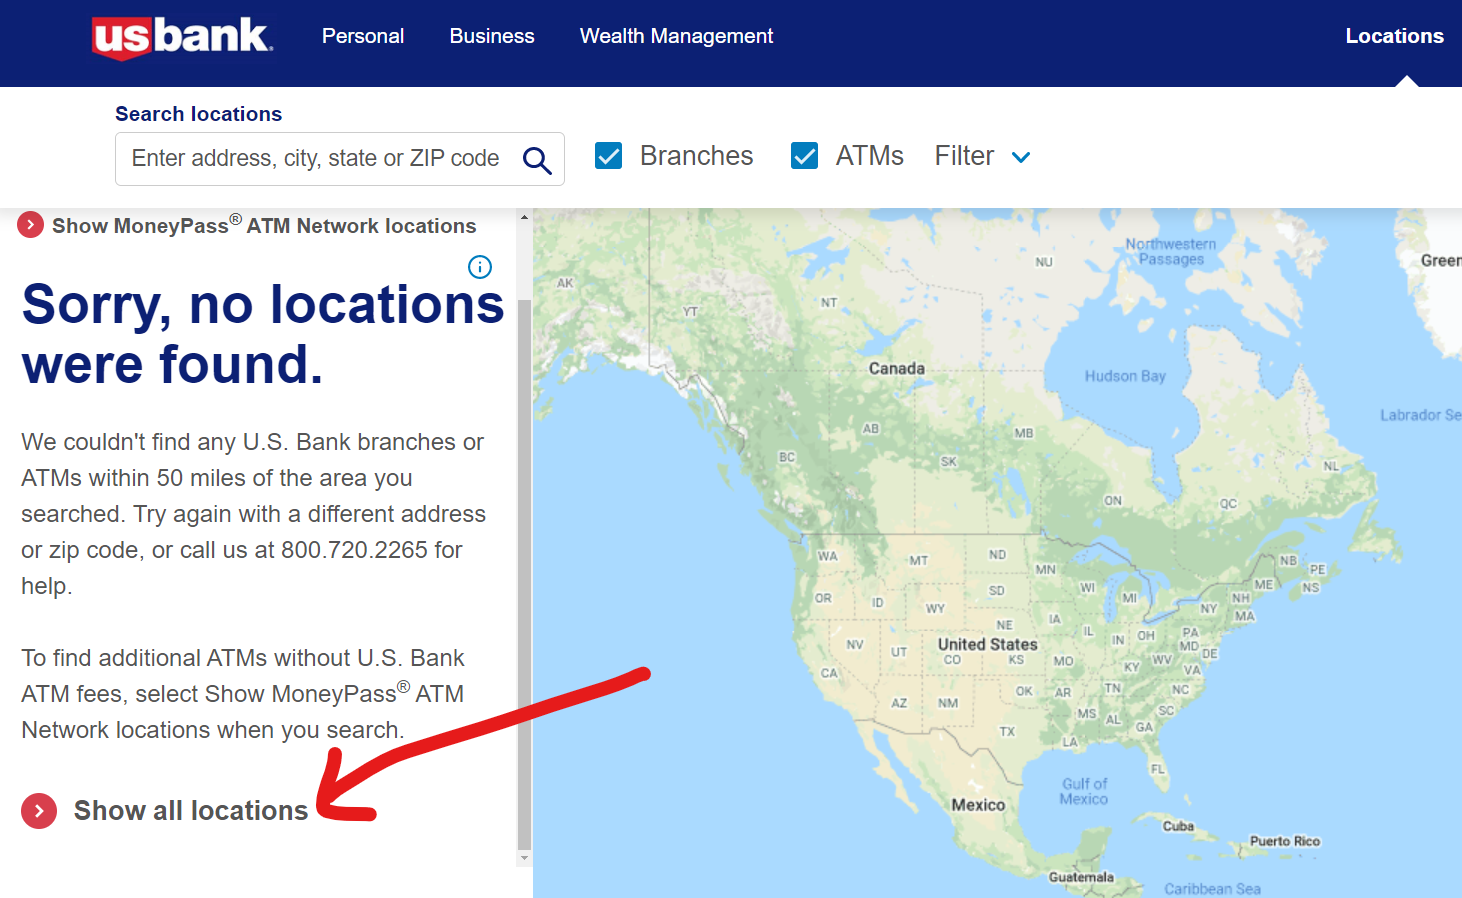 Browse all the US Bank locations